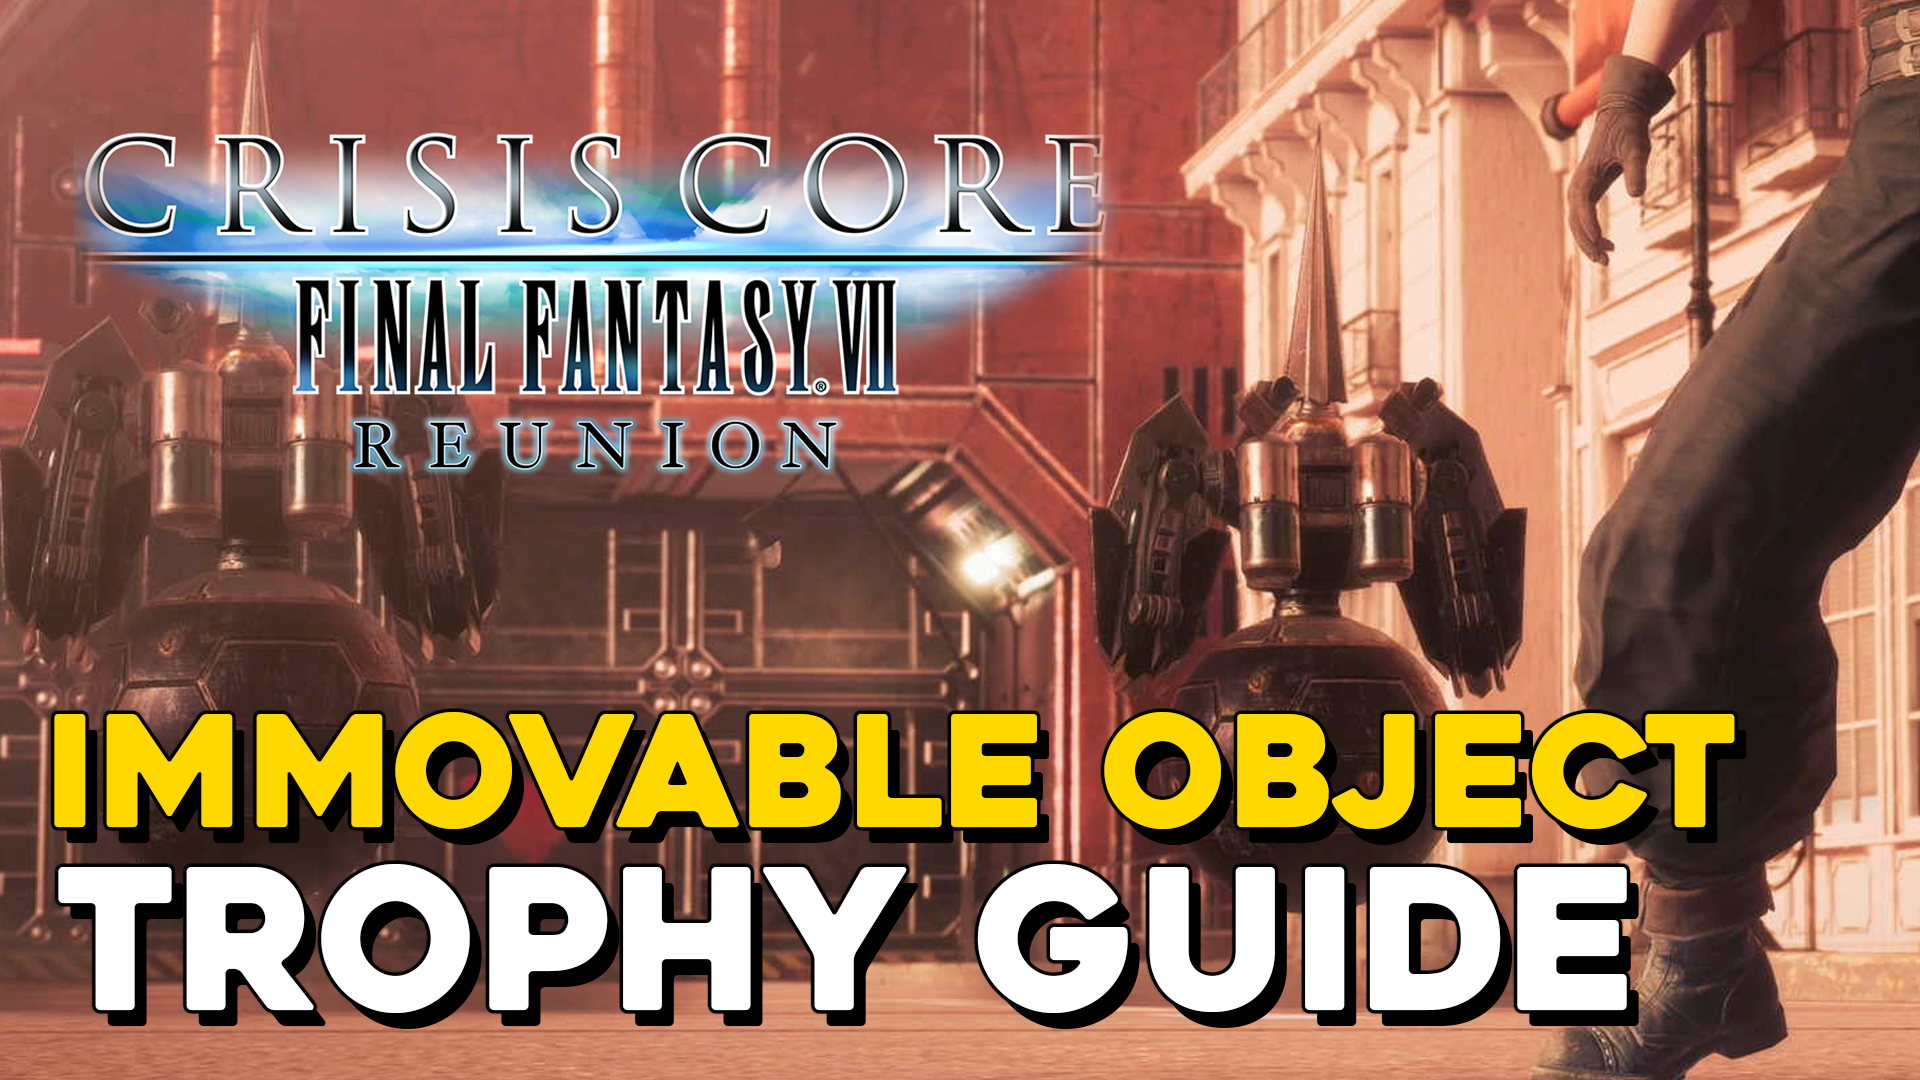 Crisis Core Final Fantasy 7 Reunion Immovable Object Trophy Guide.png